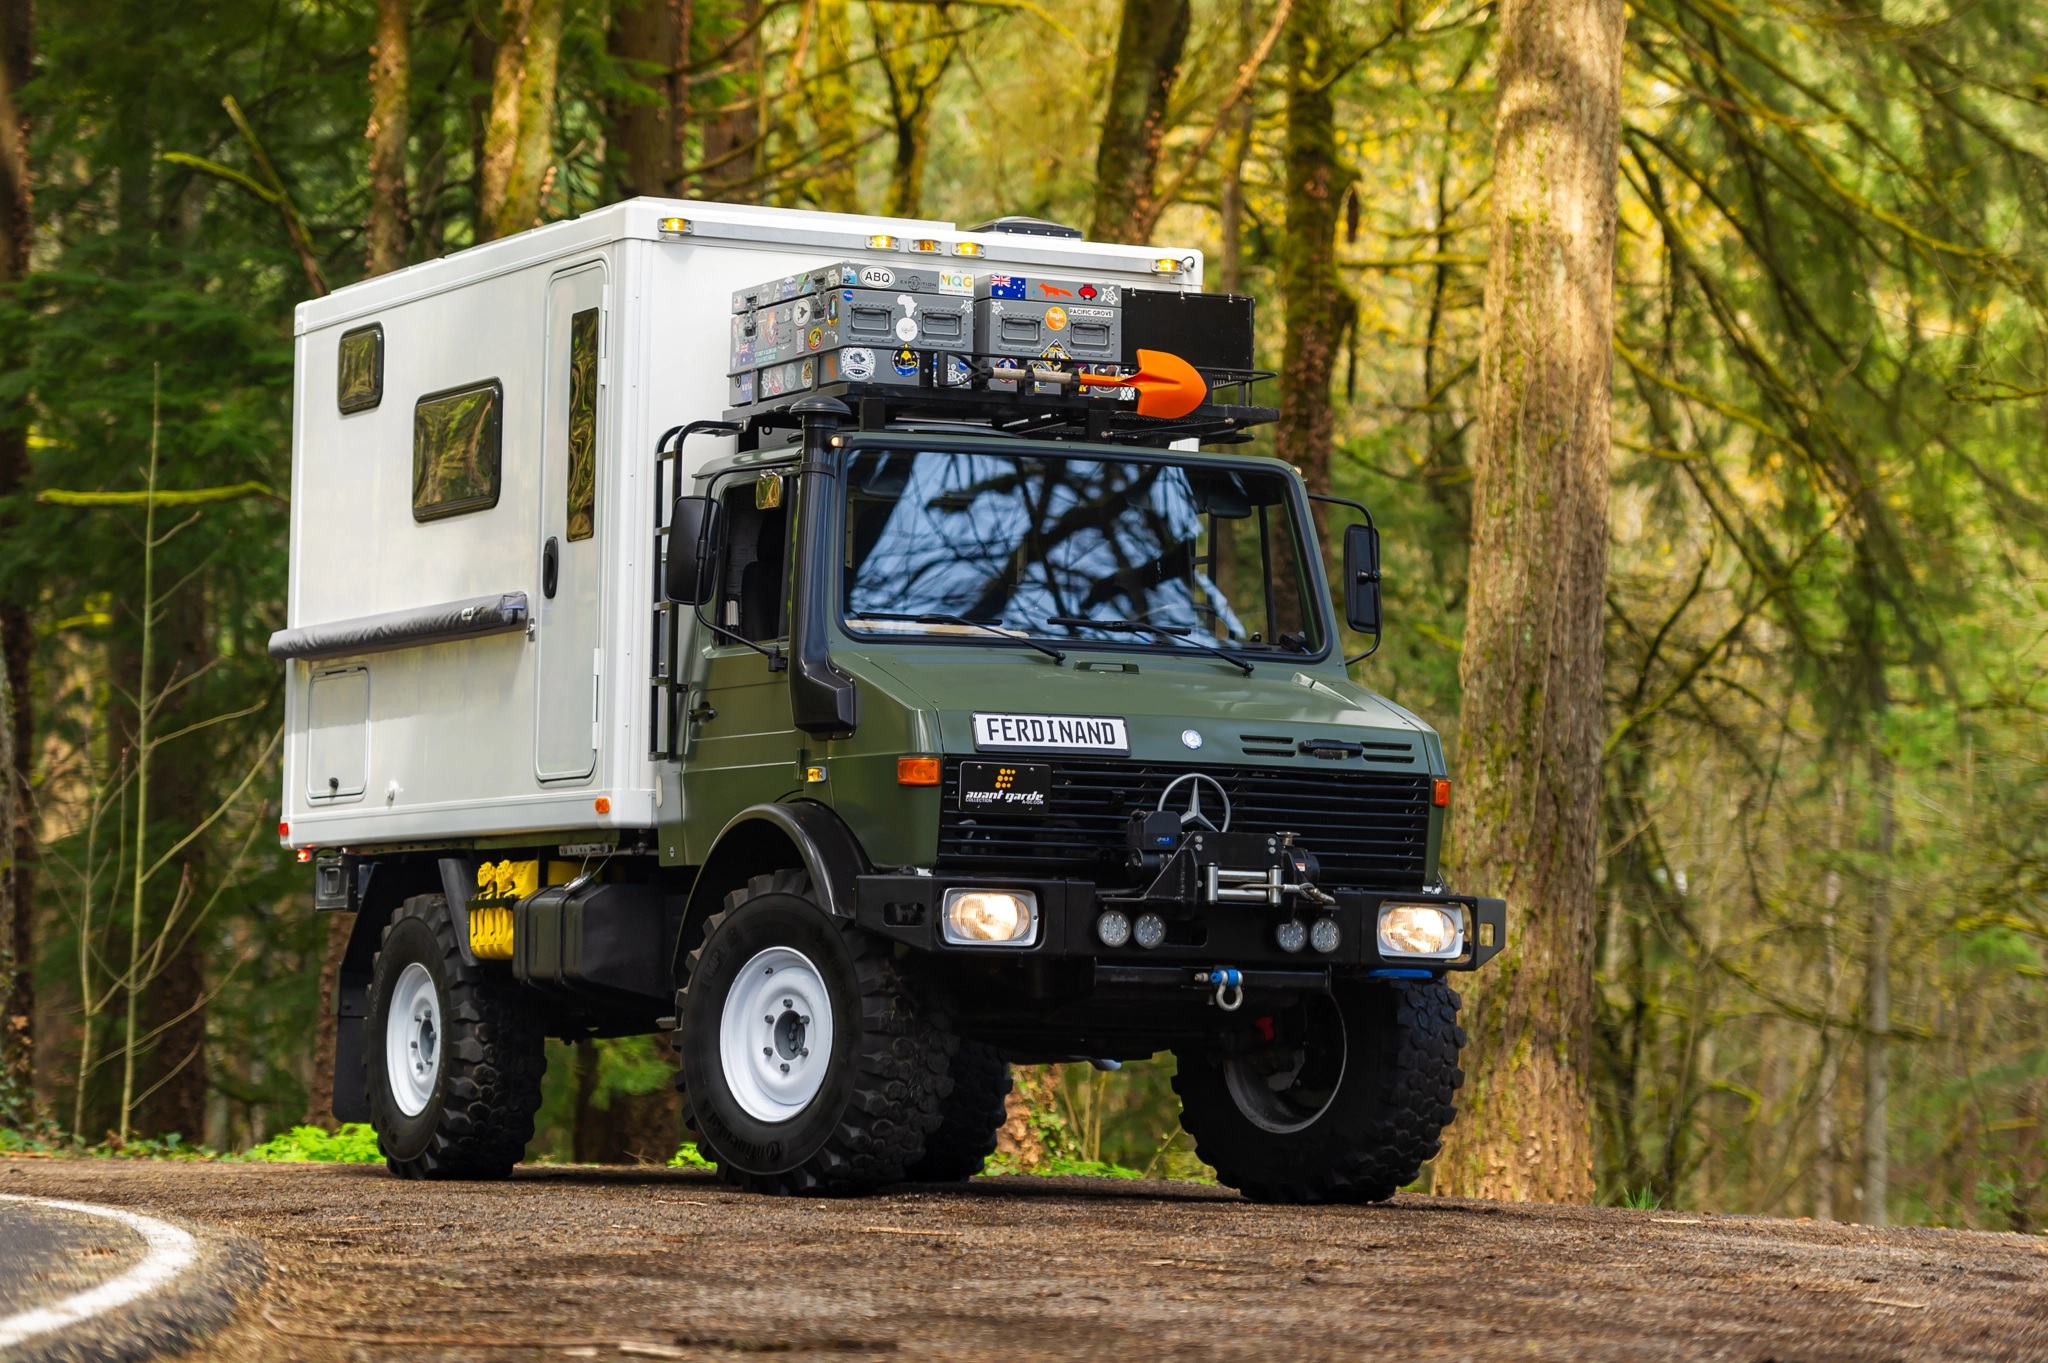 https://s1.cdn.autoevolution.com/images/news/this-unimog-u1300l-camper-conversion-allows-for-memorable-expedition-style-trips-214602_1.jpg